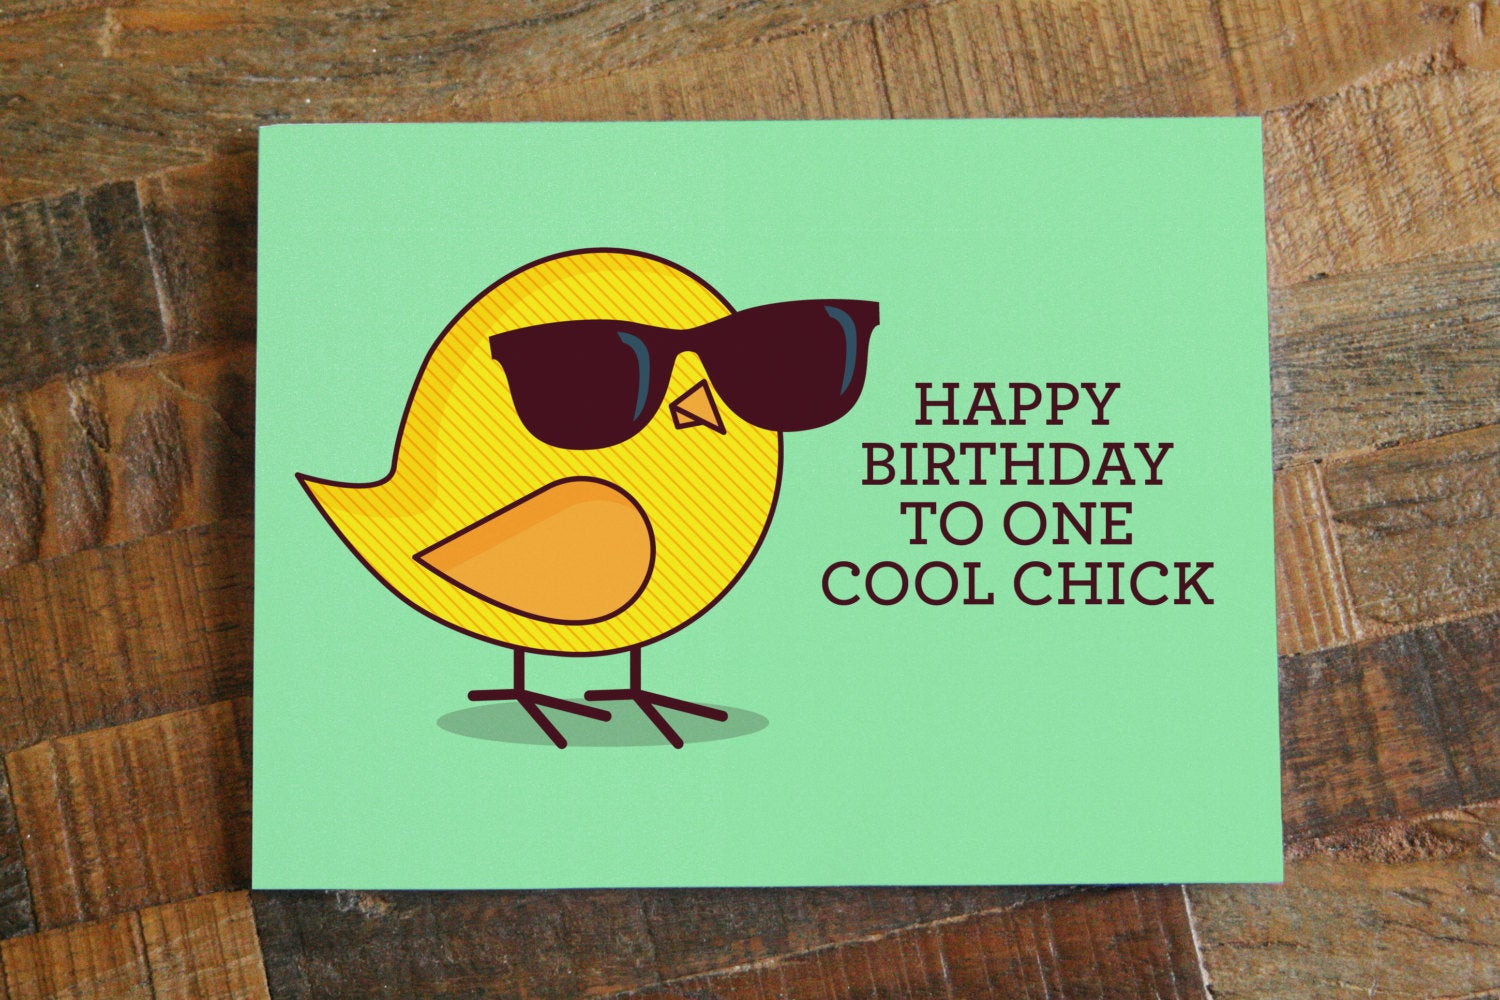 Funny Birthday Cards For Her
 Funny Birthday Card For Her Happy Birthday to e Cool